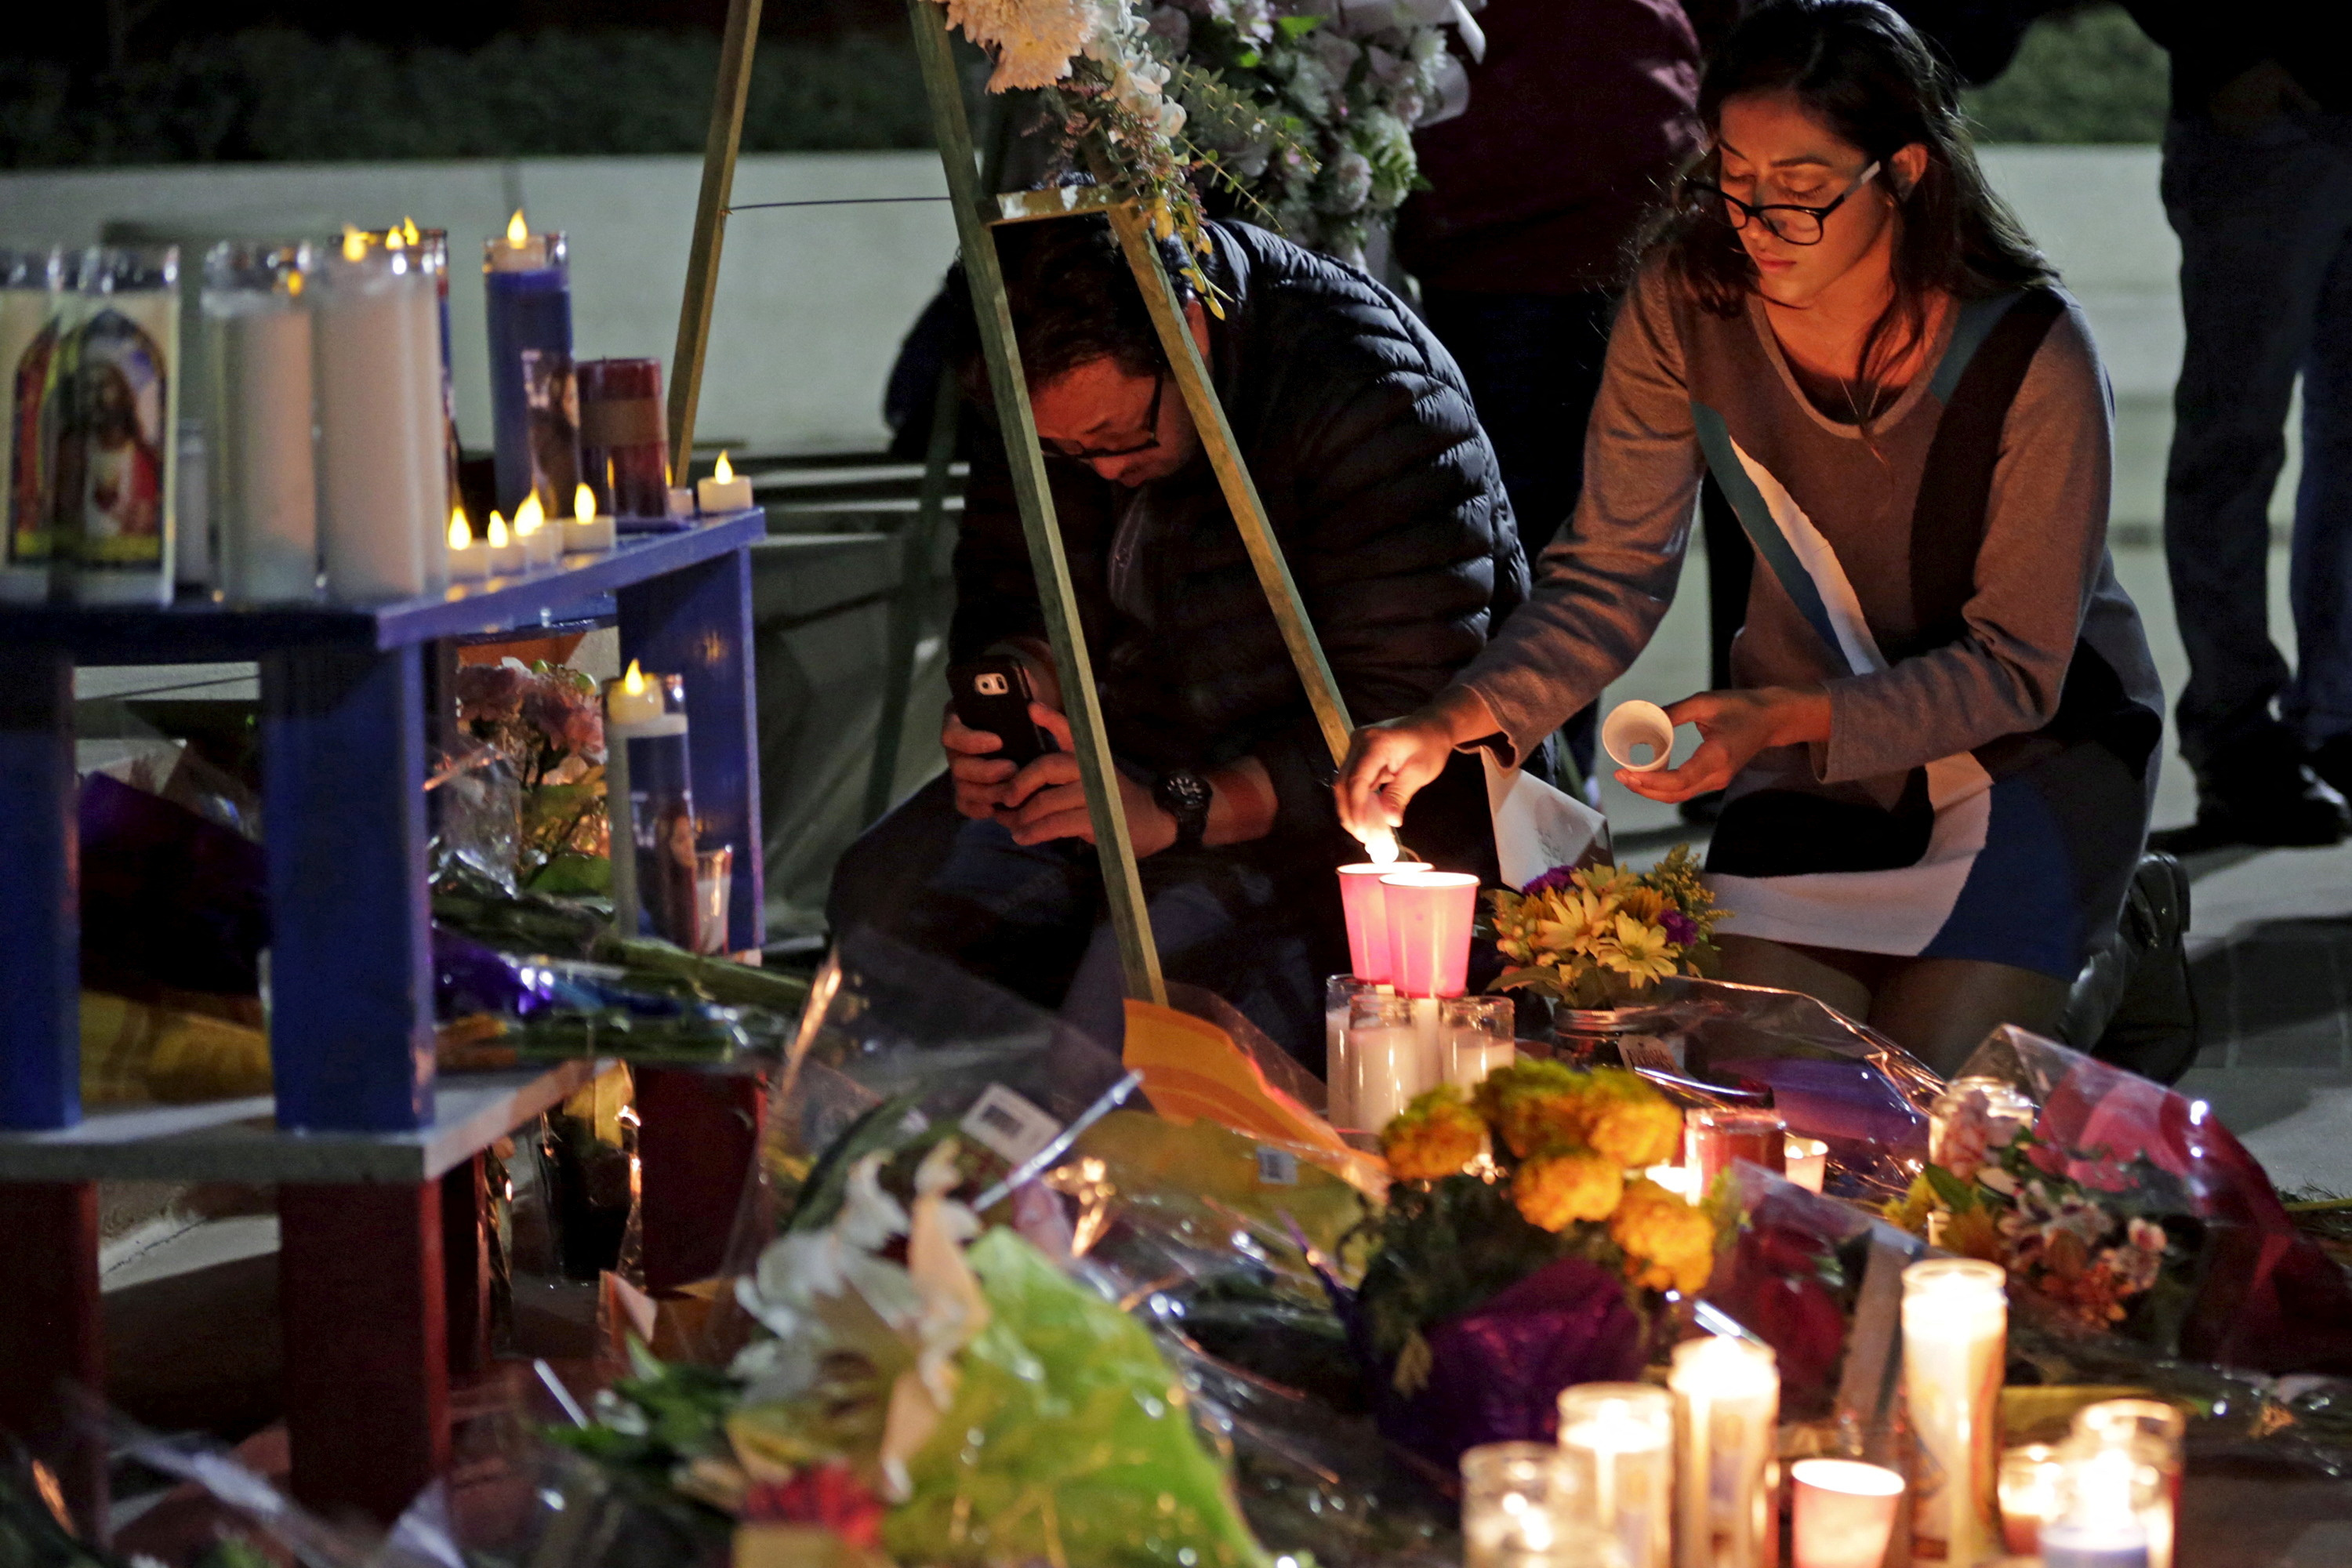 A woman places flowers at a makeshift shrine in honor of Nohemi Gonzalez at California State University in Long Beach, California